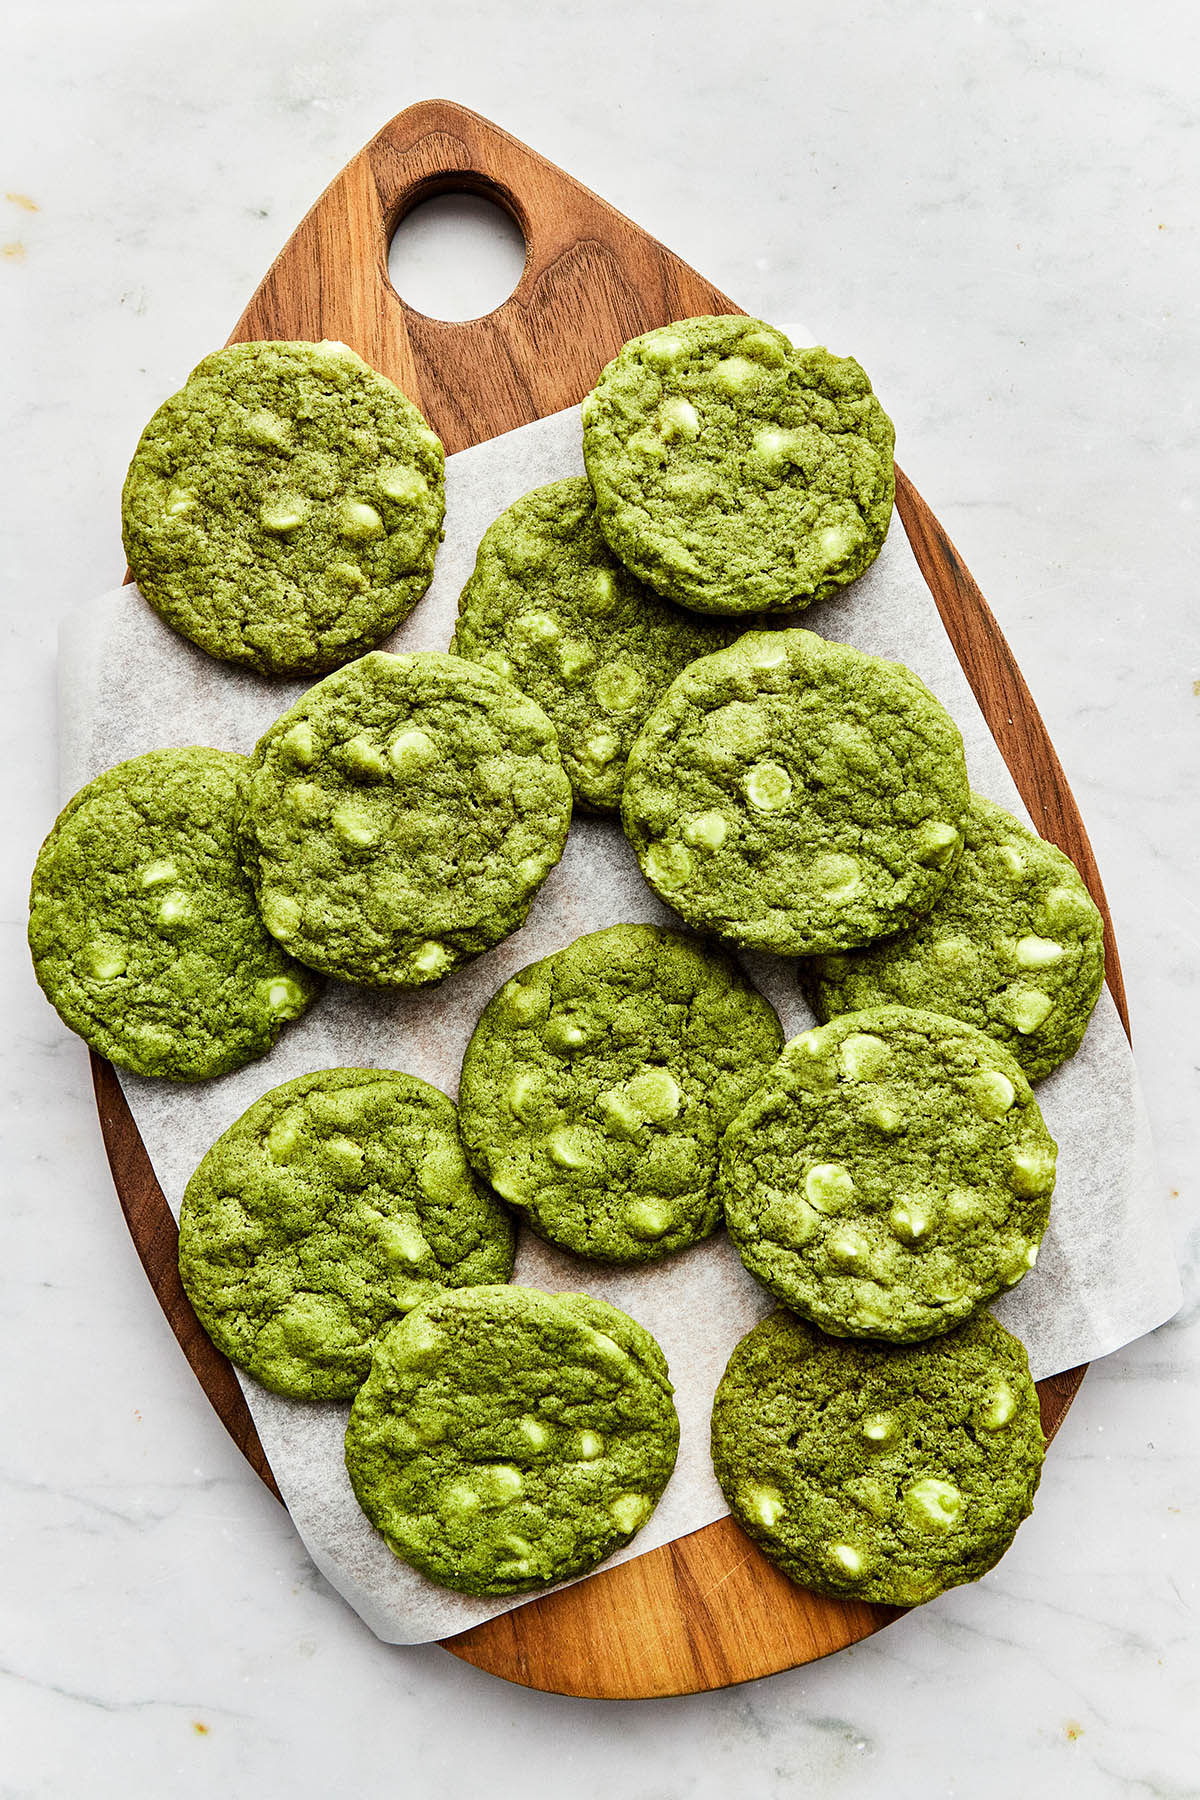 Matcha cookies laid on top of piece of parchment paper on a wooden teardrop-shaped board.